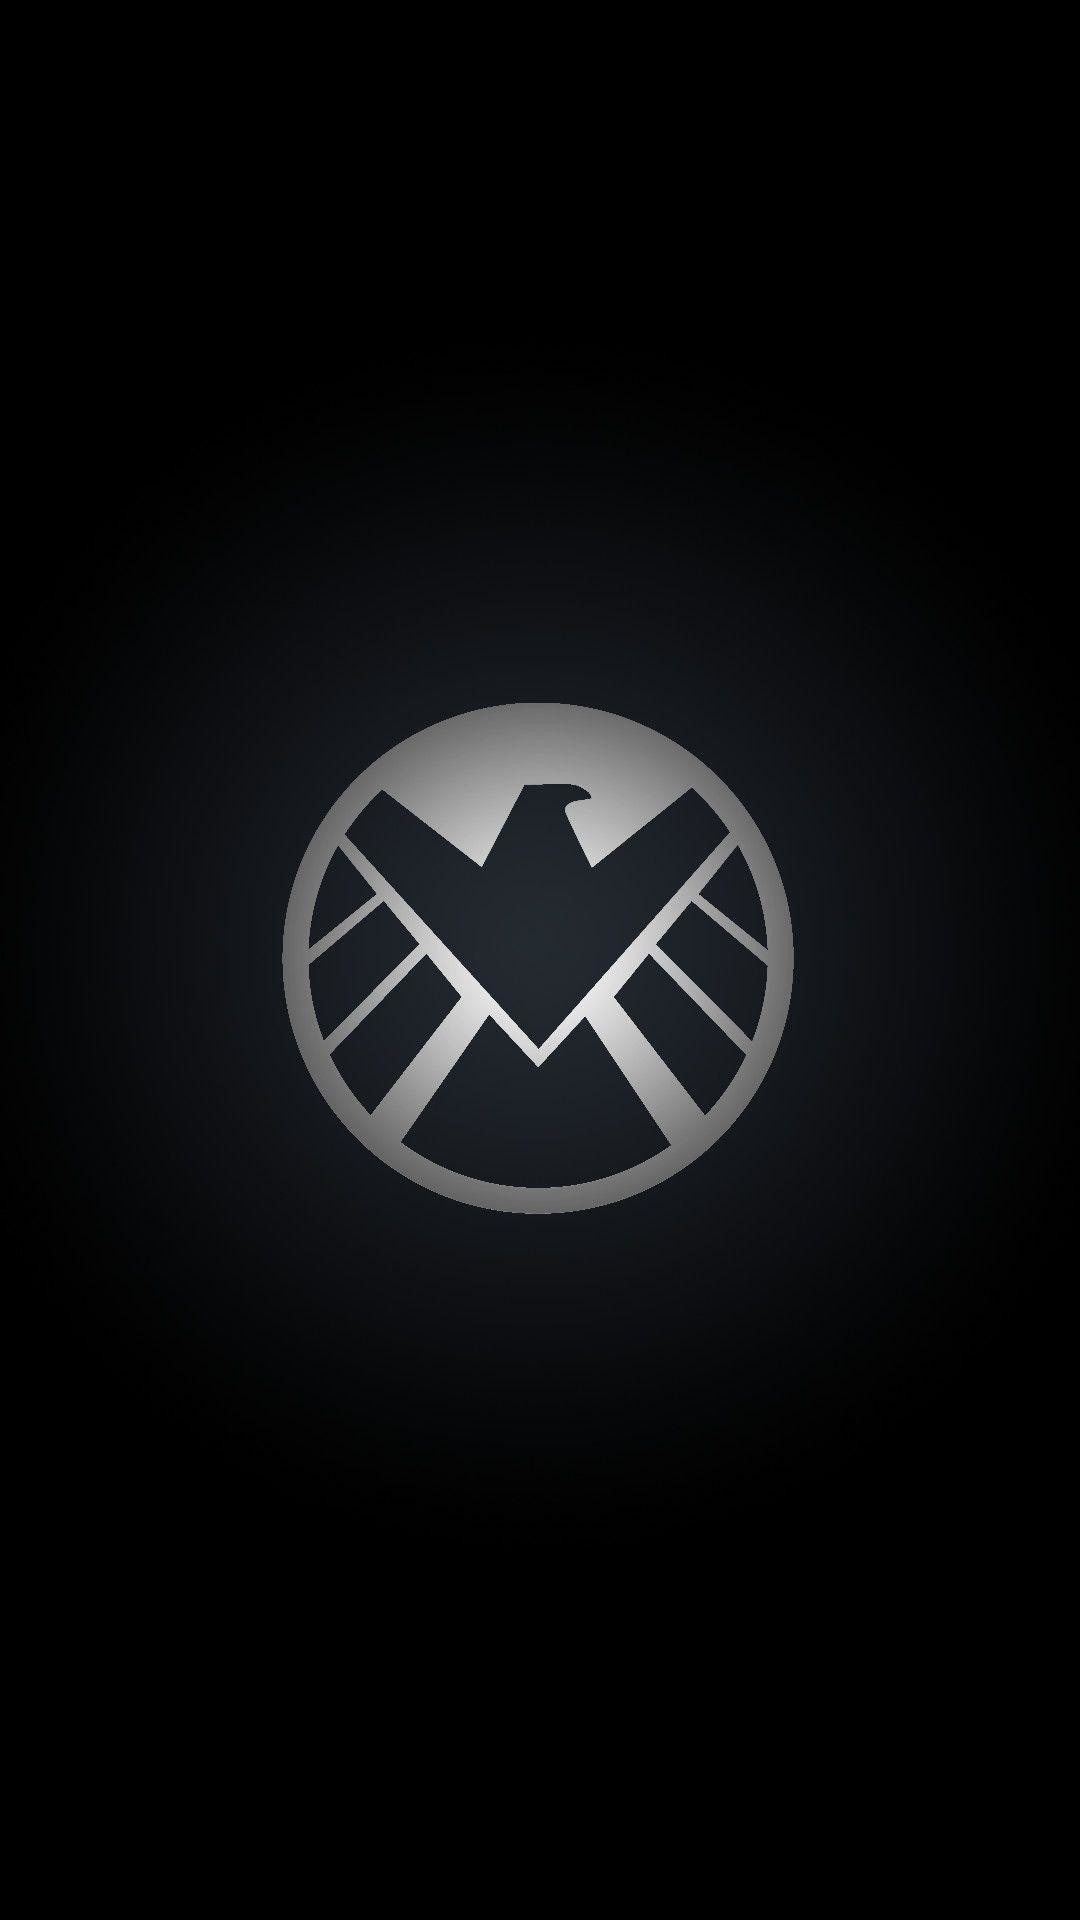 S.H.I.E.L.D.: An elite team of agents founded to combat technologically advanced threats to world security. 1080x1920 Full HD Wallpaper.